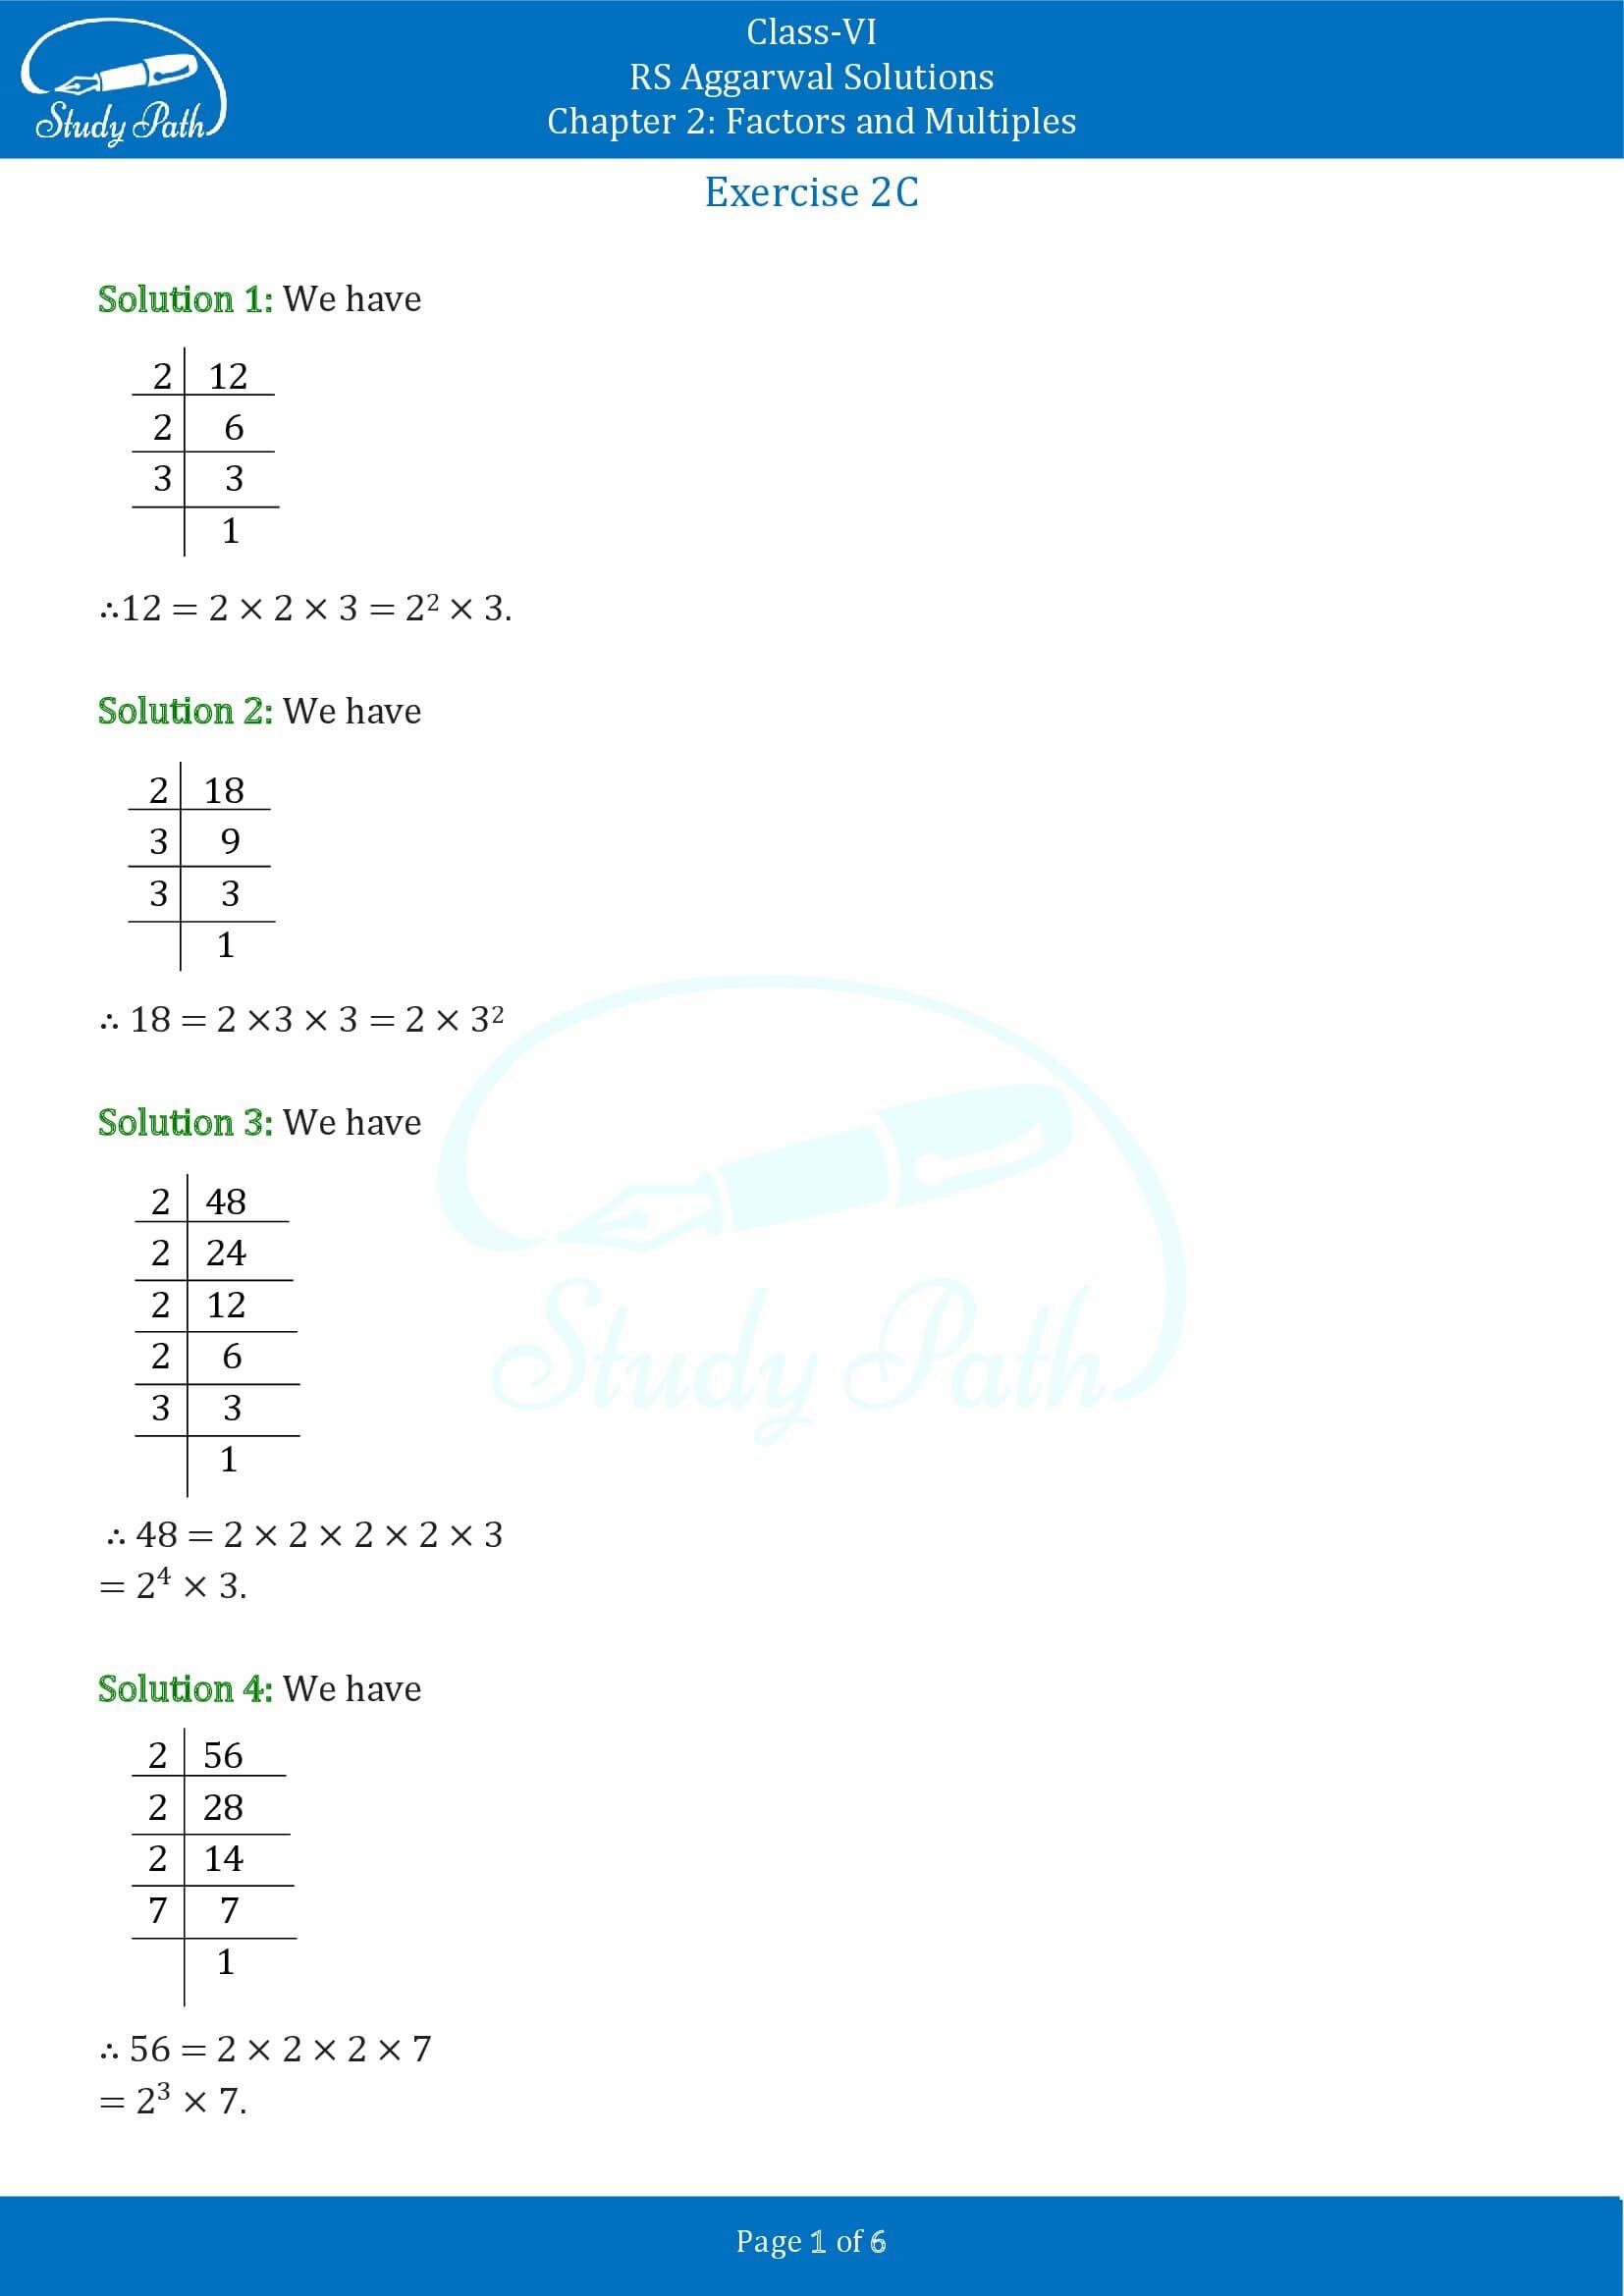 RS Aggarwal Solutions Class 6 Chapter 2 Factors and Multiples Exercise 2C 00001